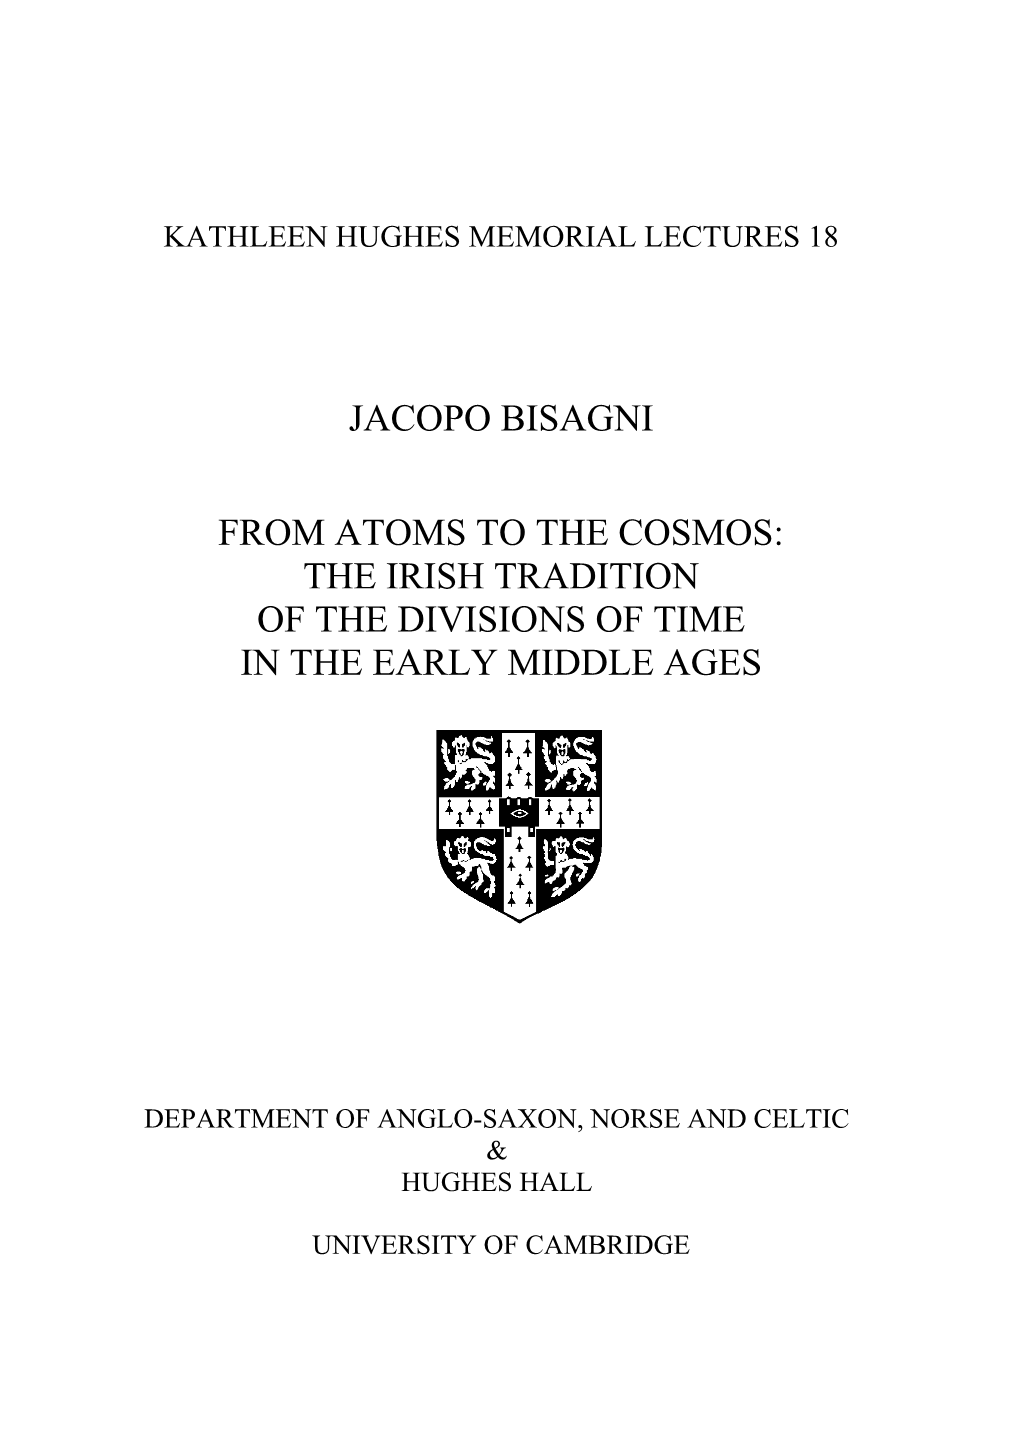 Jacopo Bisagni from Atoms to the Cosmos: the Irish